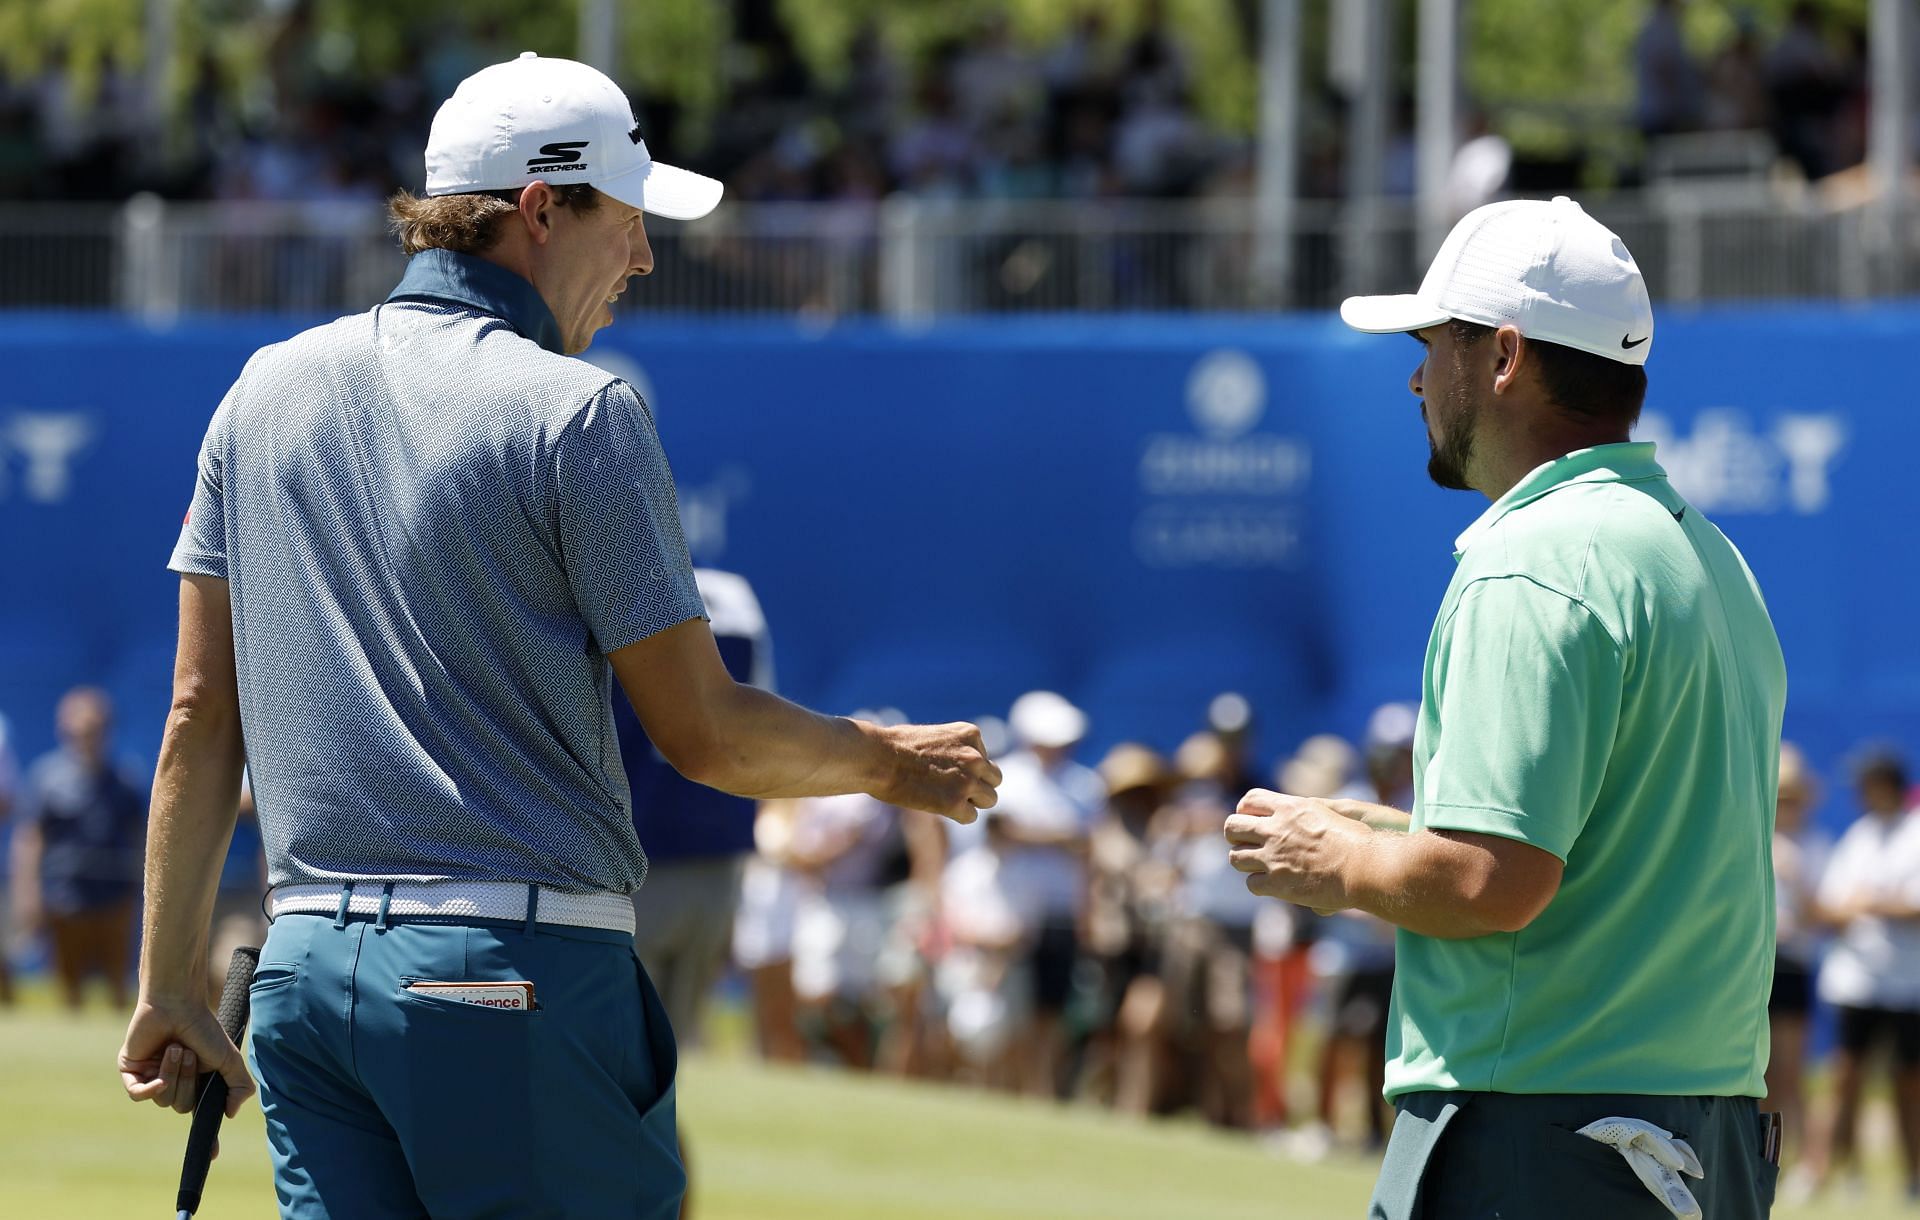 Alex Fitzpatrick (on the right) and his brother Matt Fitzpatrick at the 2023 Zurich Classic of New Orleans (Image via Getty).